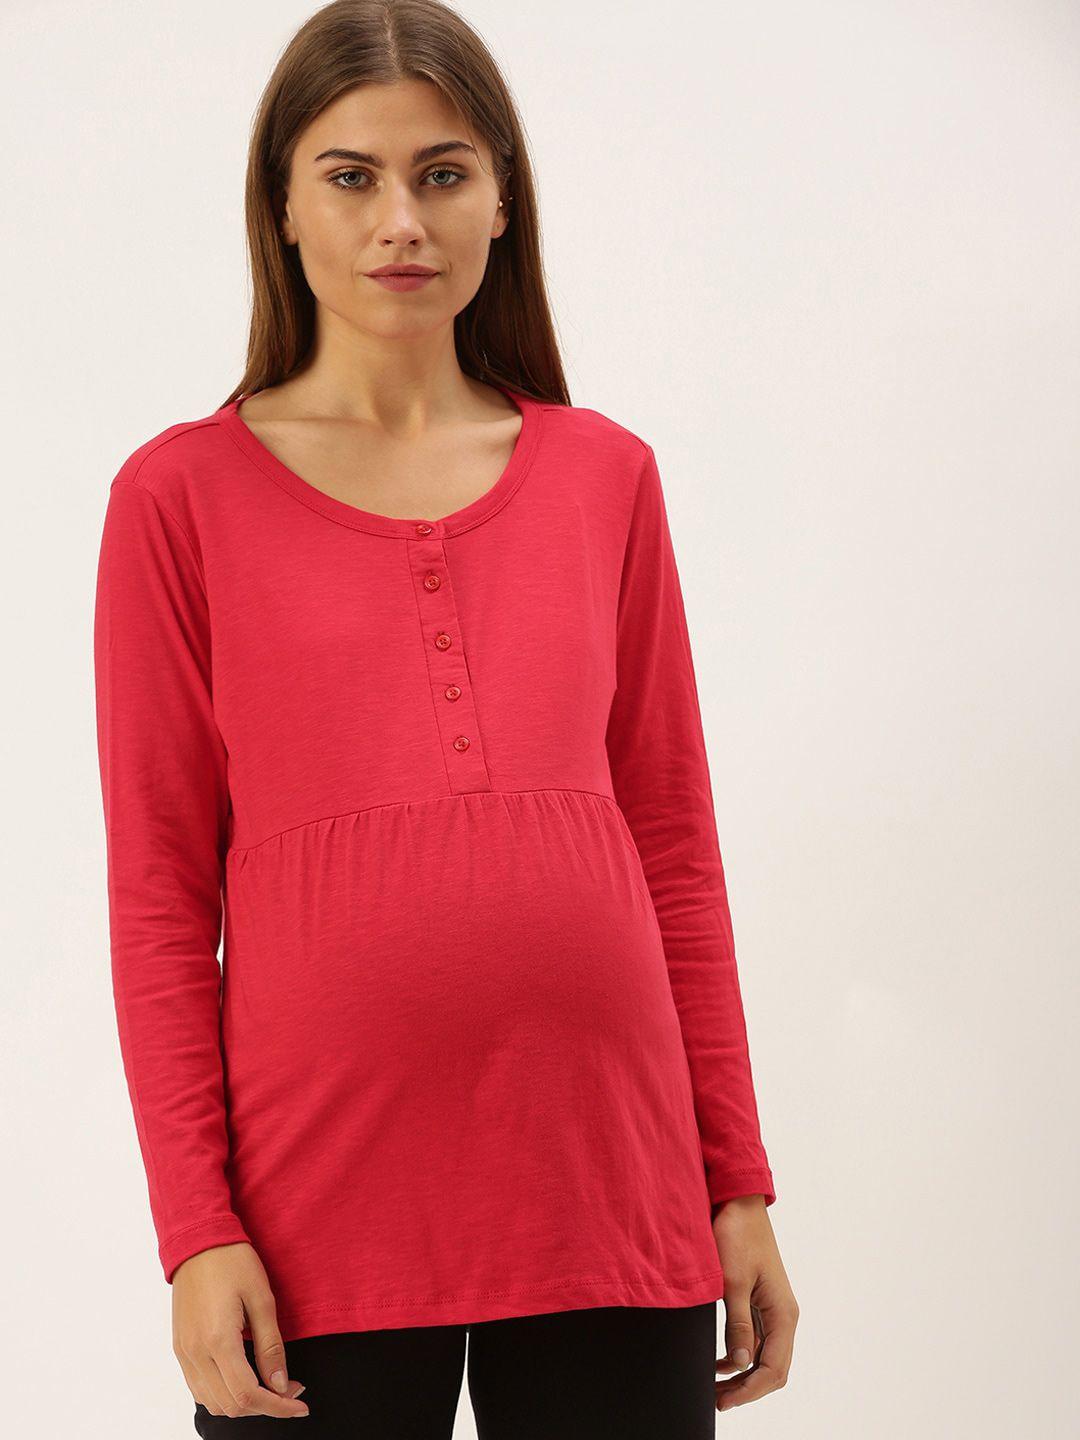 nejo round neck long sleeves maternity pure cotton top